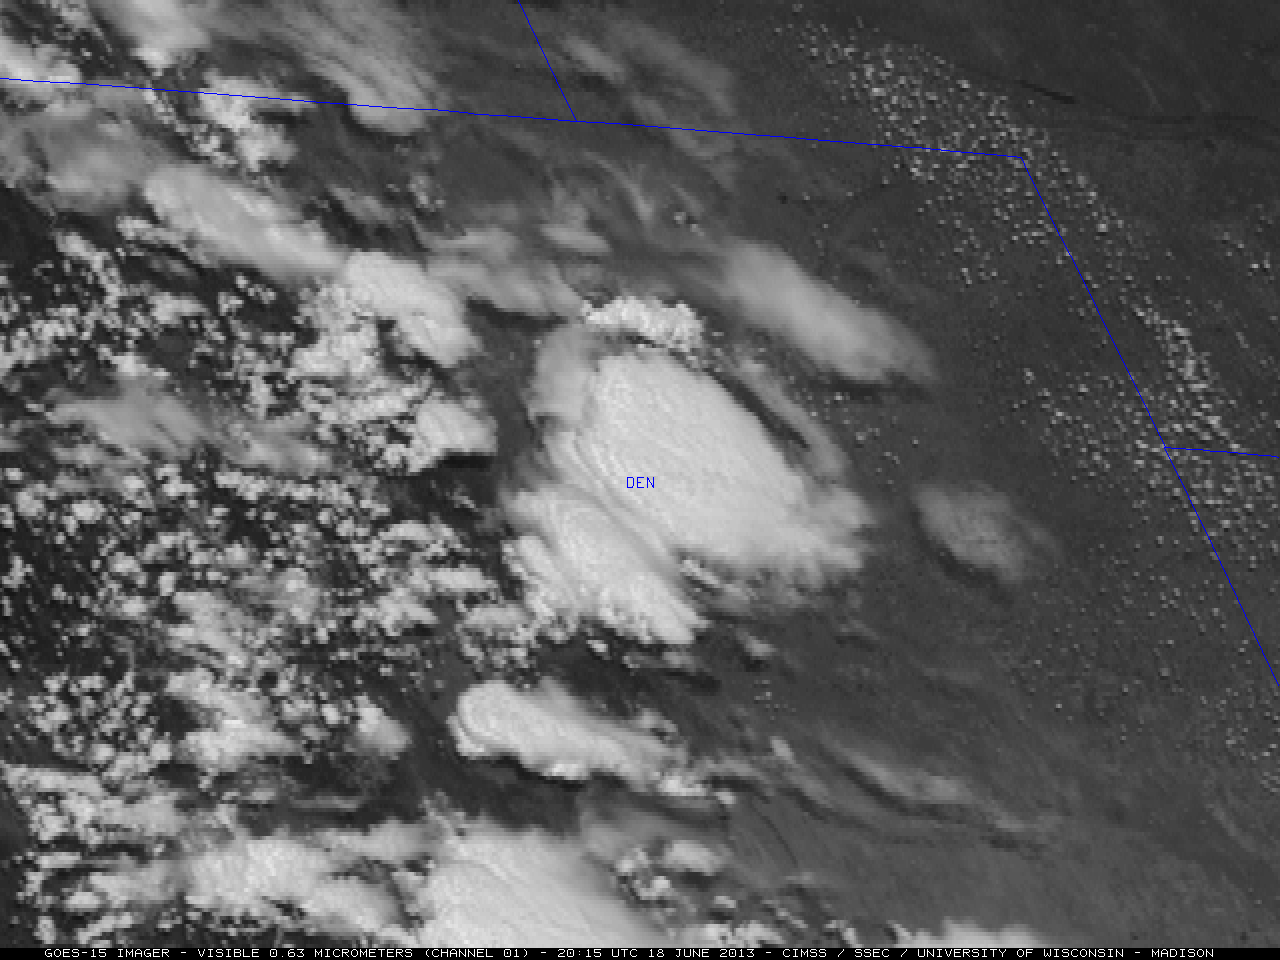 GOES-15 0.63 Âµm visible channel images (click image to play animation)